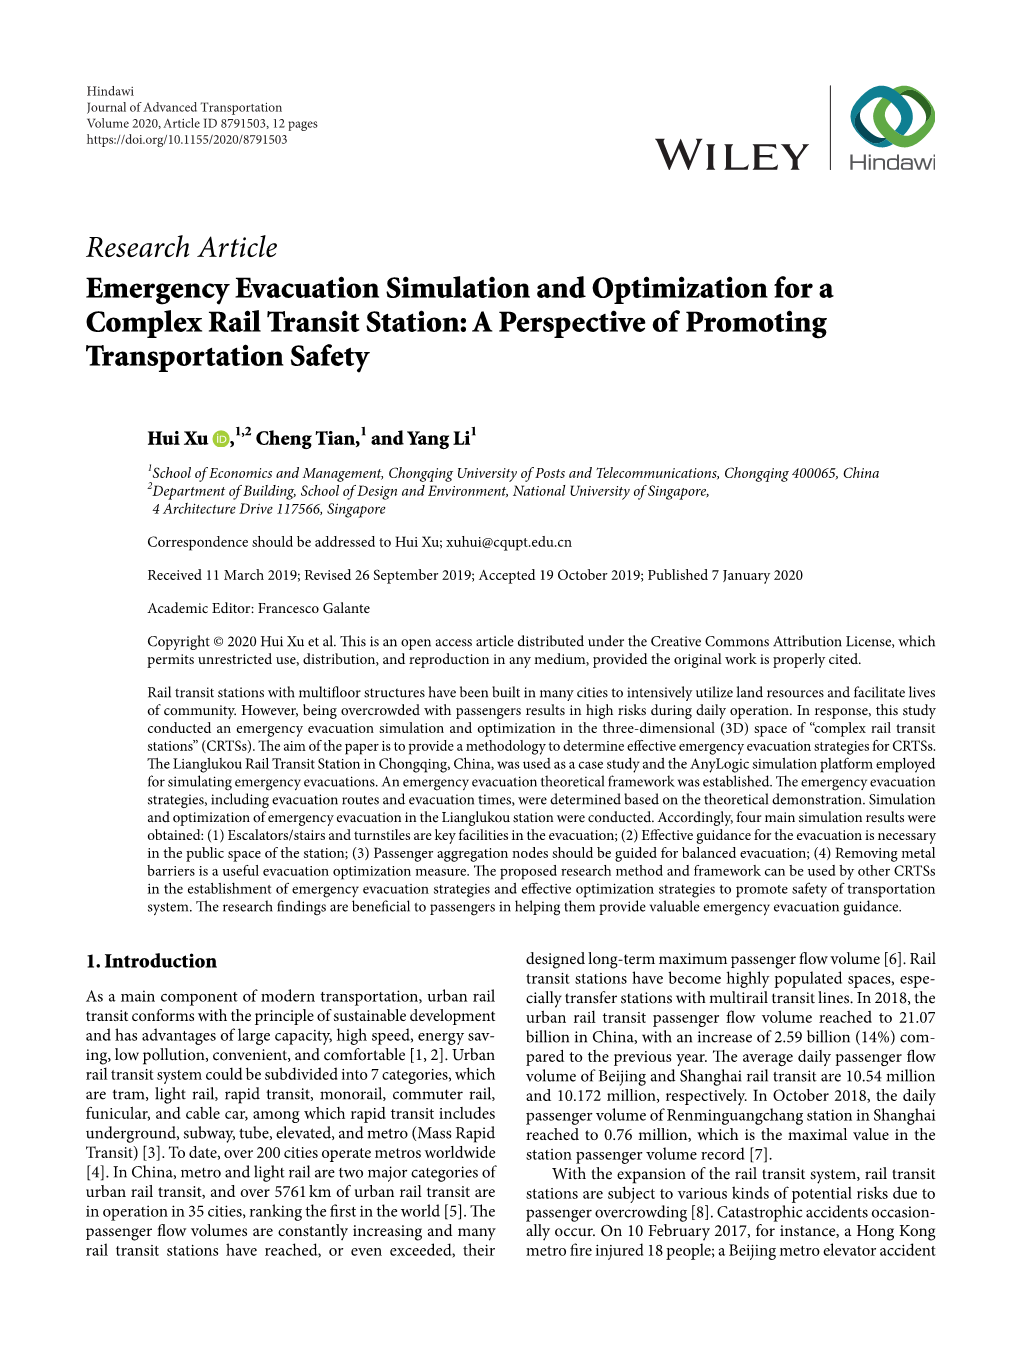 Emergency Evacuation Simulation and Optimization for a Complex Rail Transit Station: a Perspective of Promoting Transportation Safety